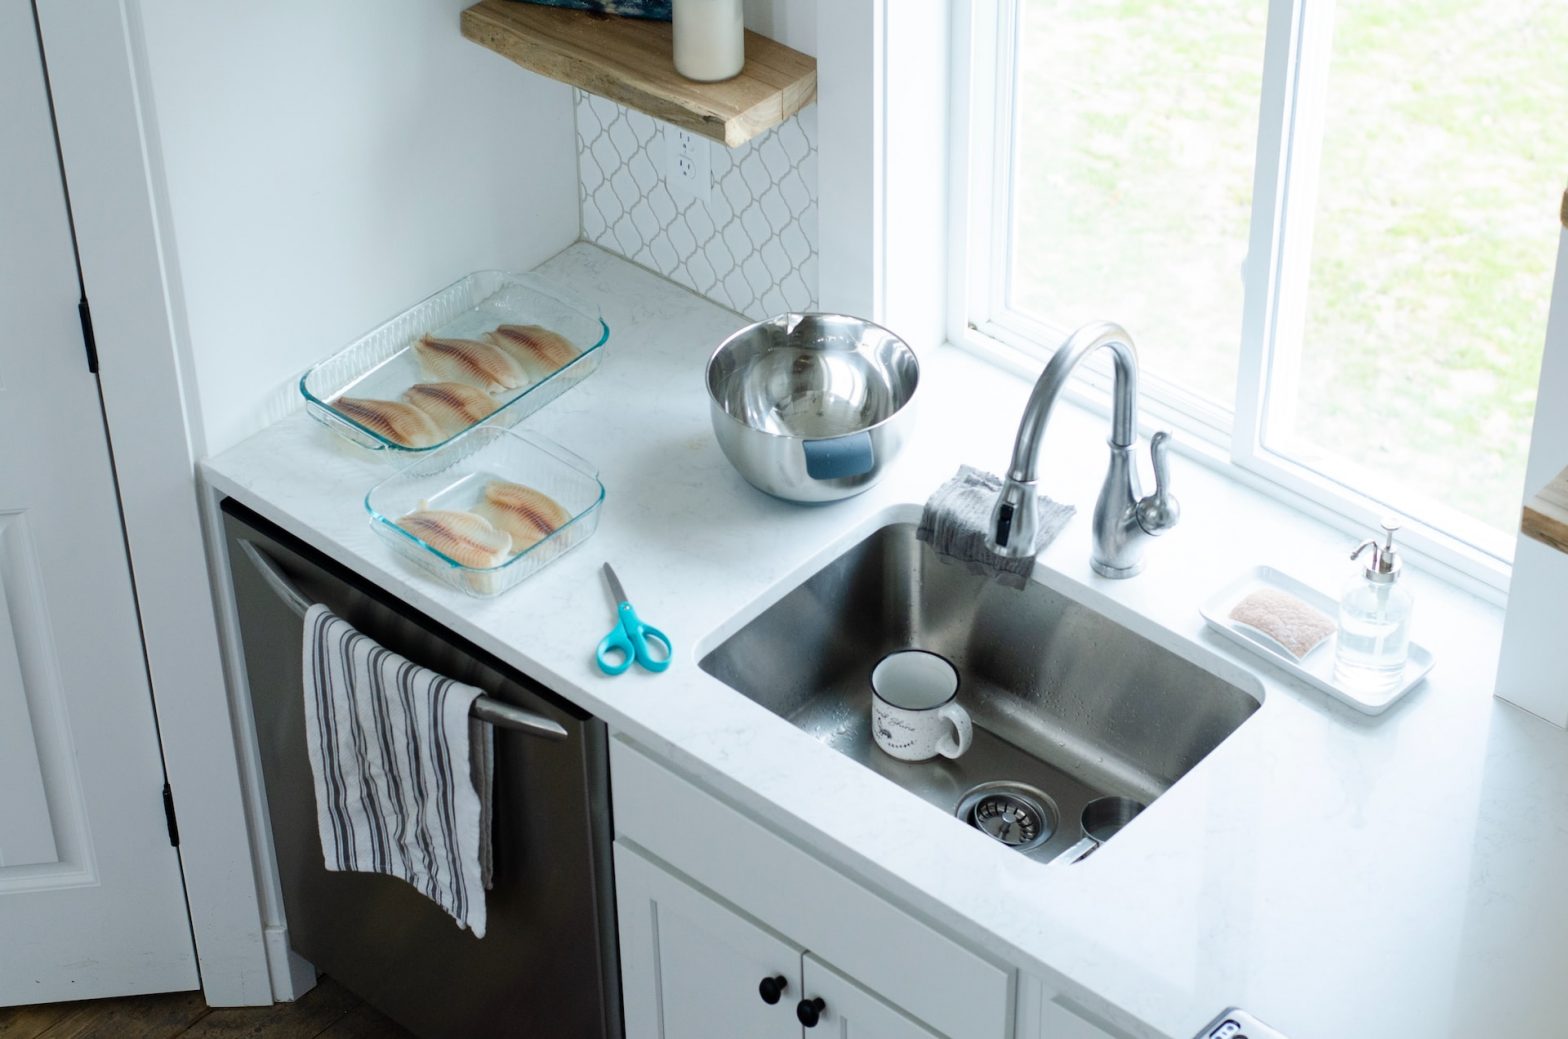 Reasons Why Your Kitchen Sink Won't Drain